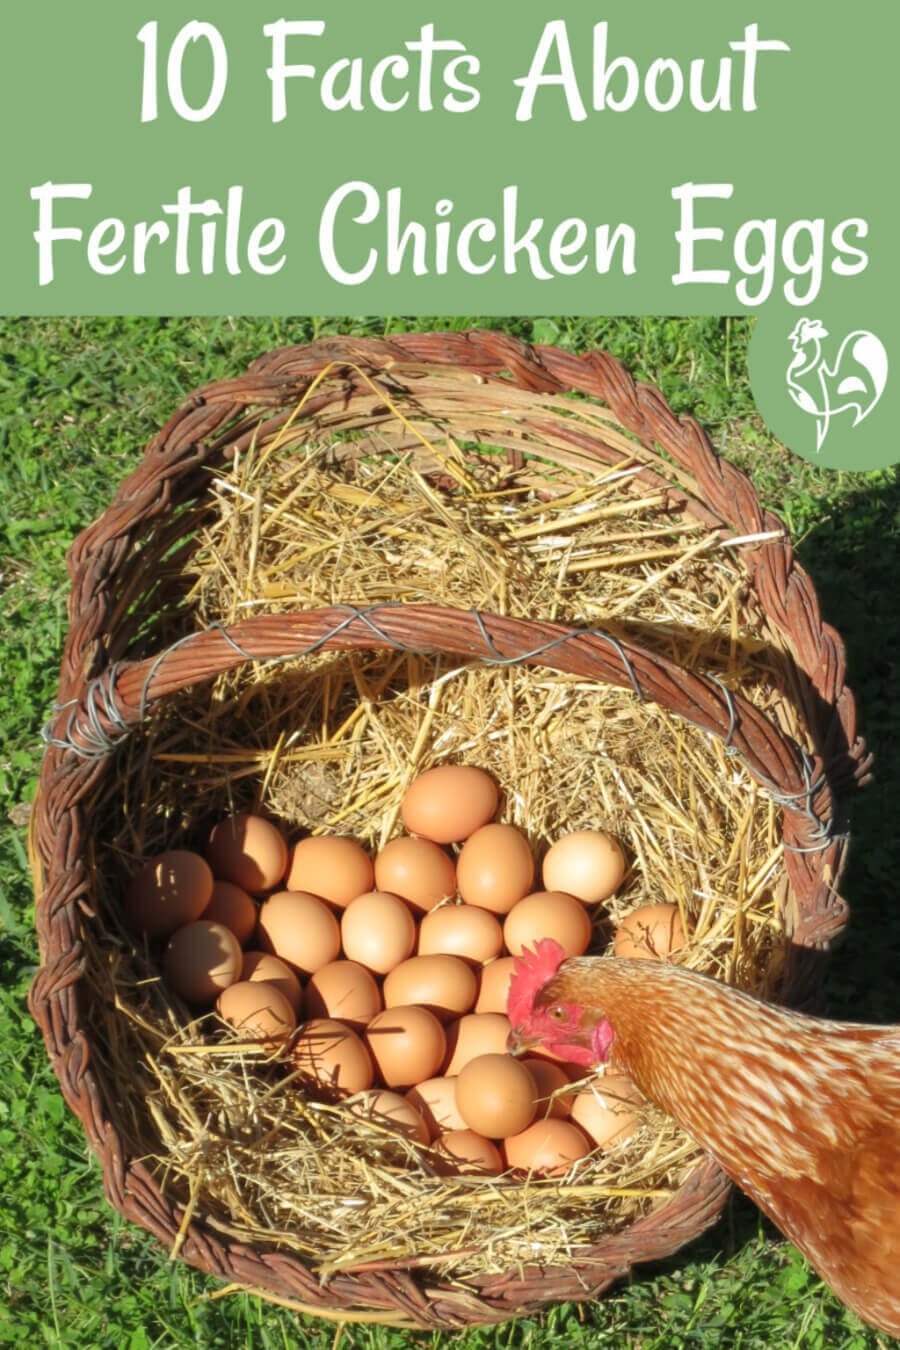 10 facts about fertile chicken eggs - pin for later.